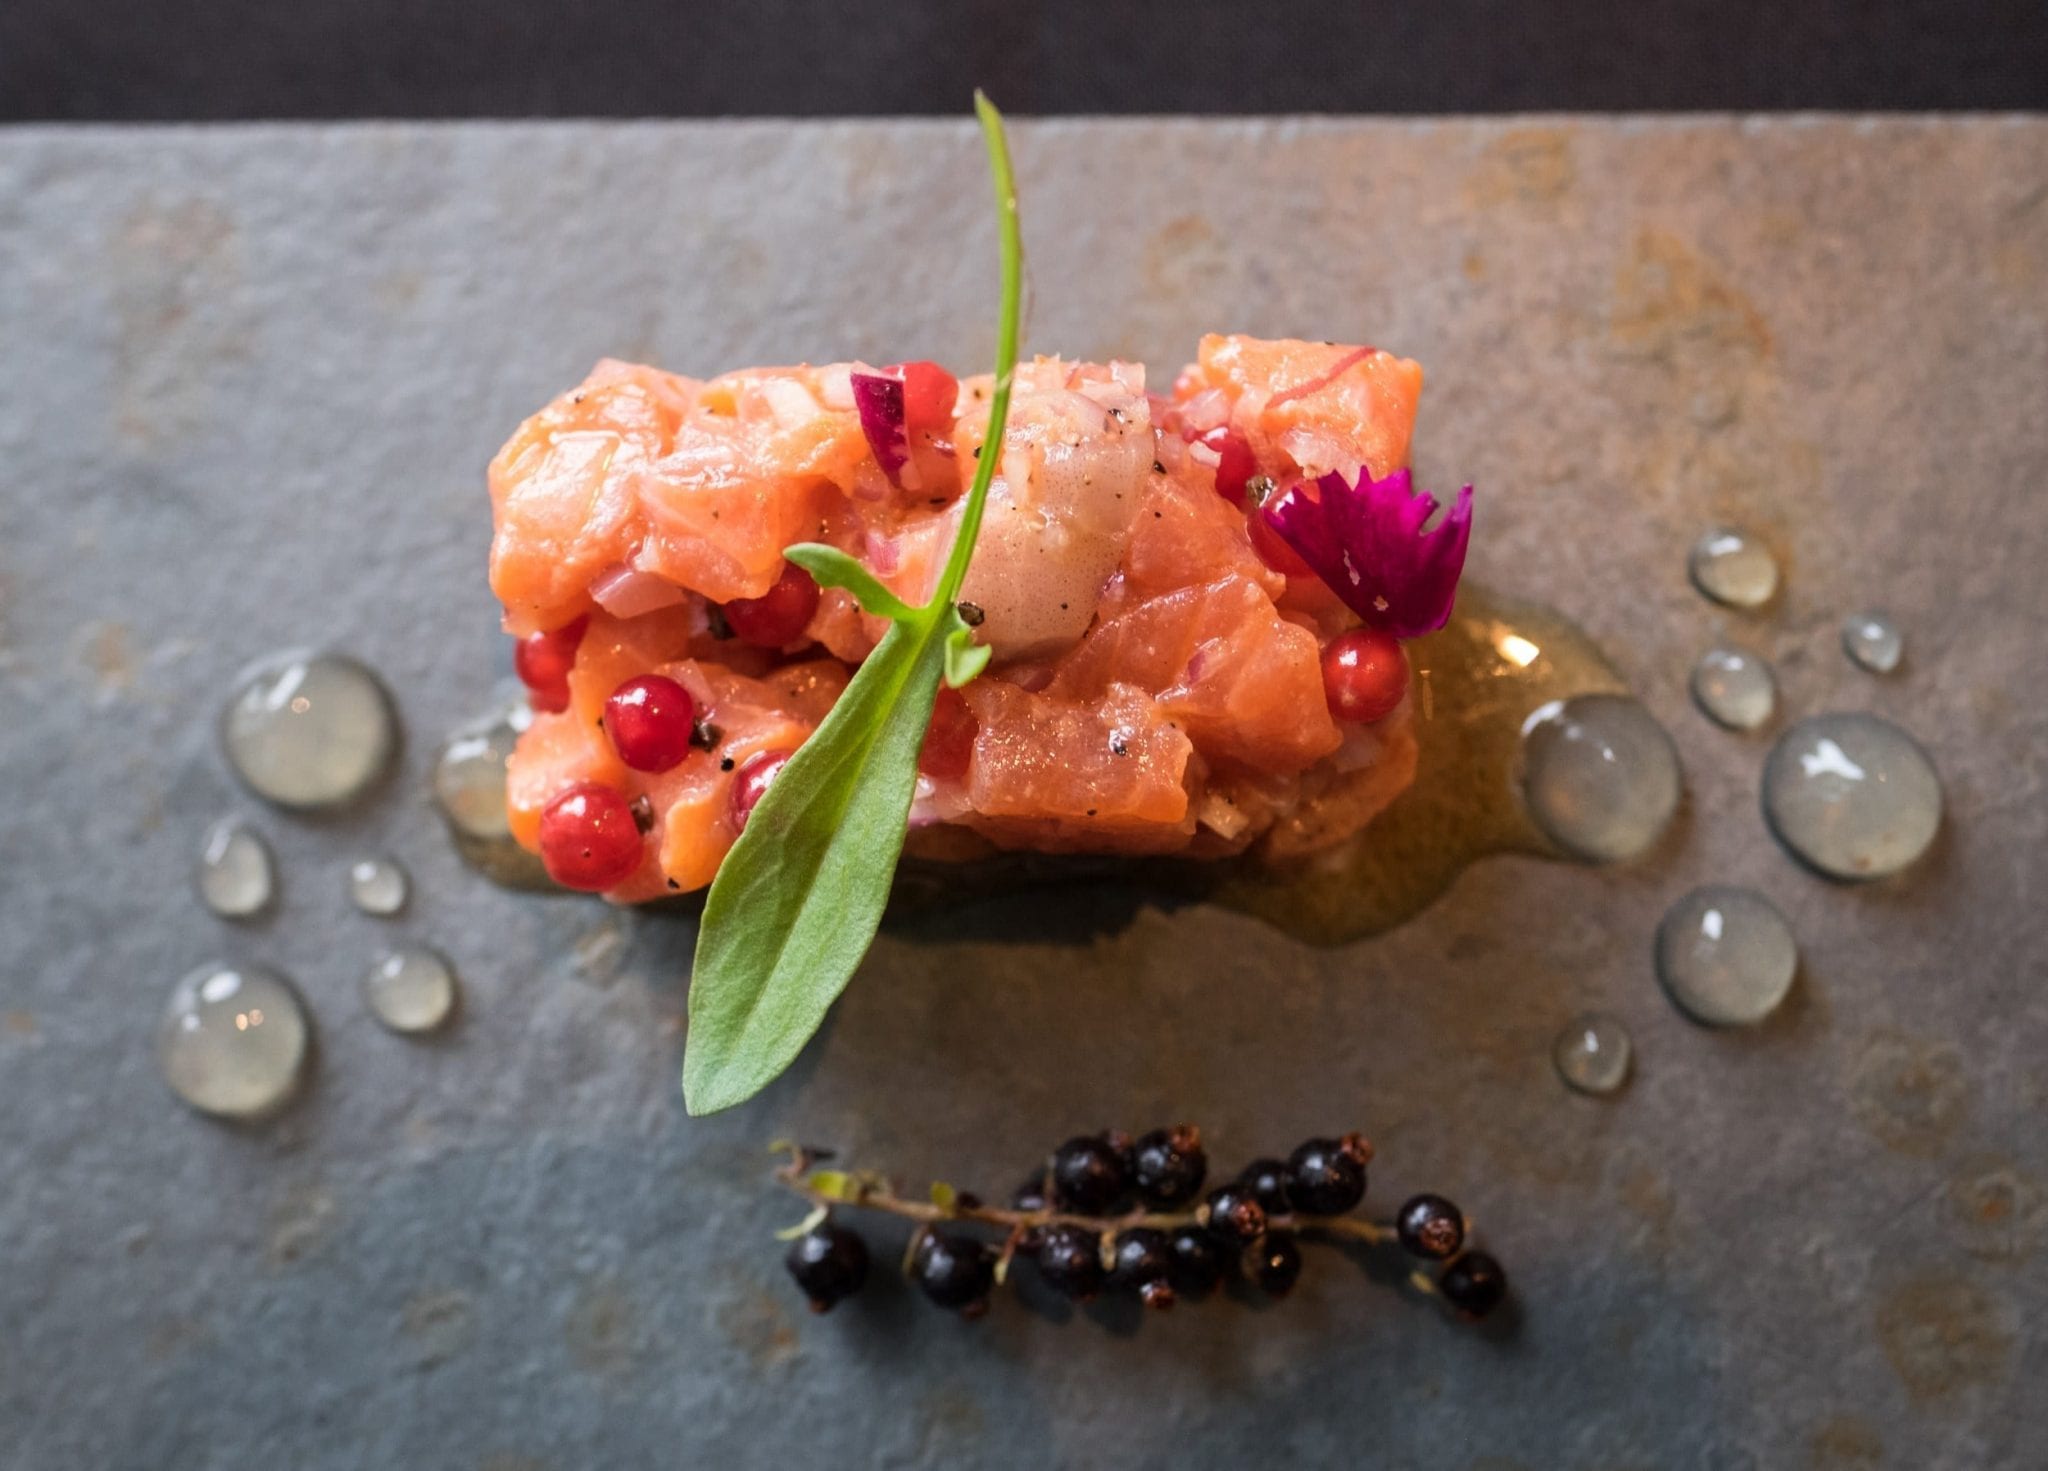 Raw salmon tartare on a plate with berries and vinegar bubbles.